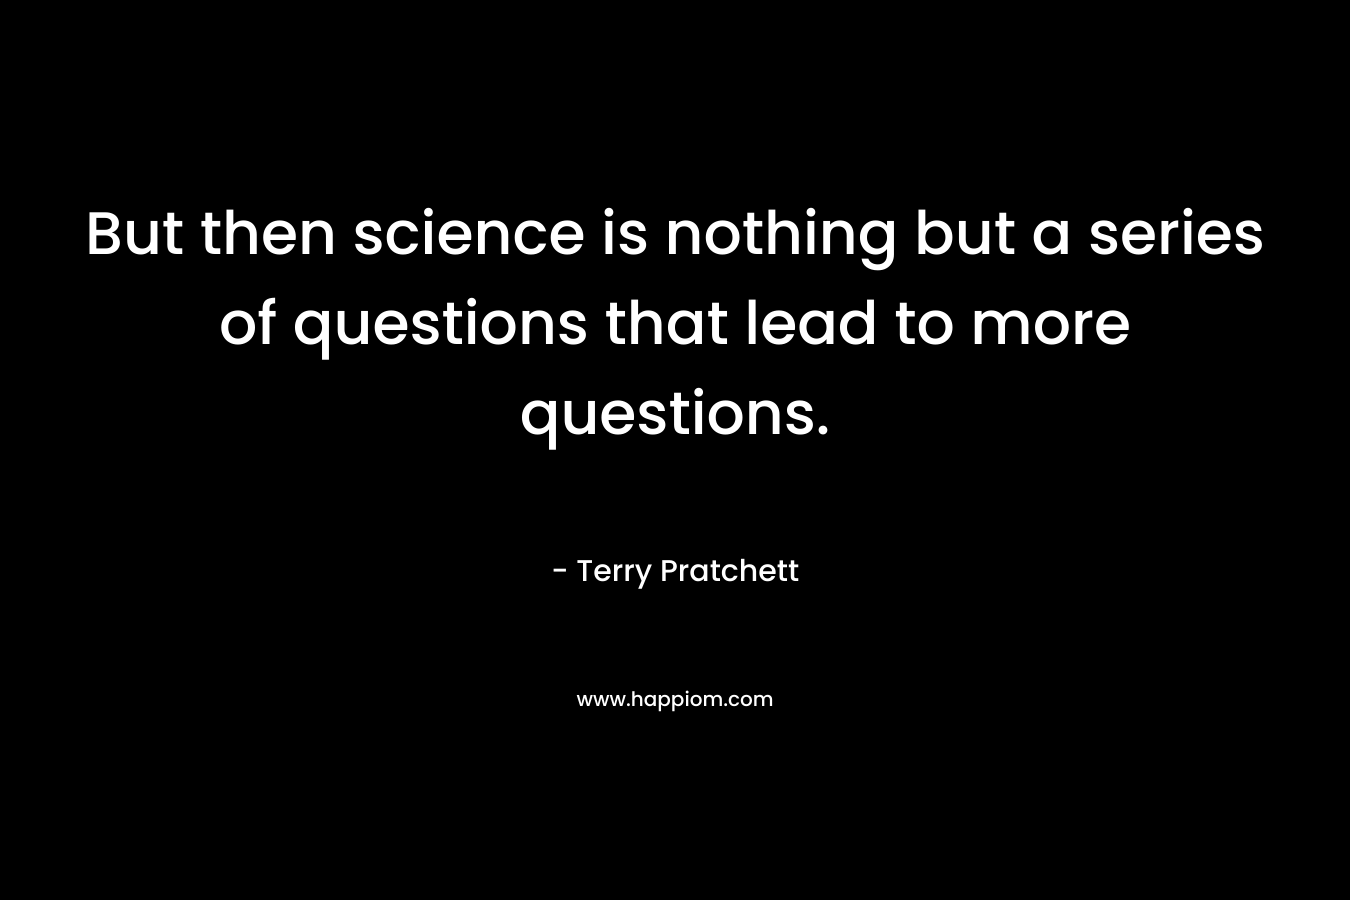 But then science is nothing but a series of questions that lead to more questions.